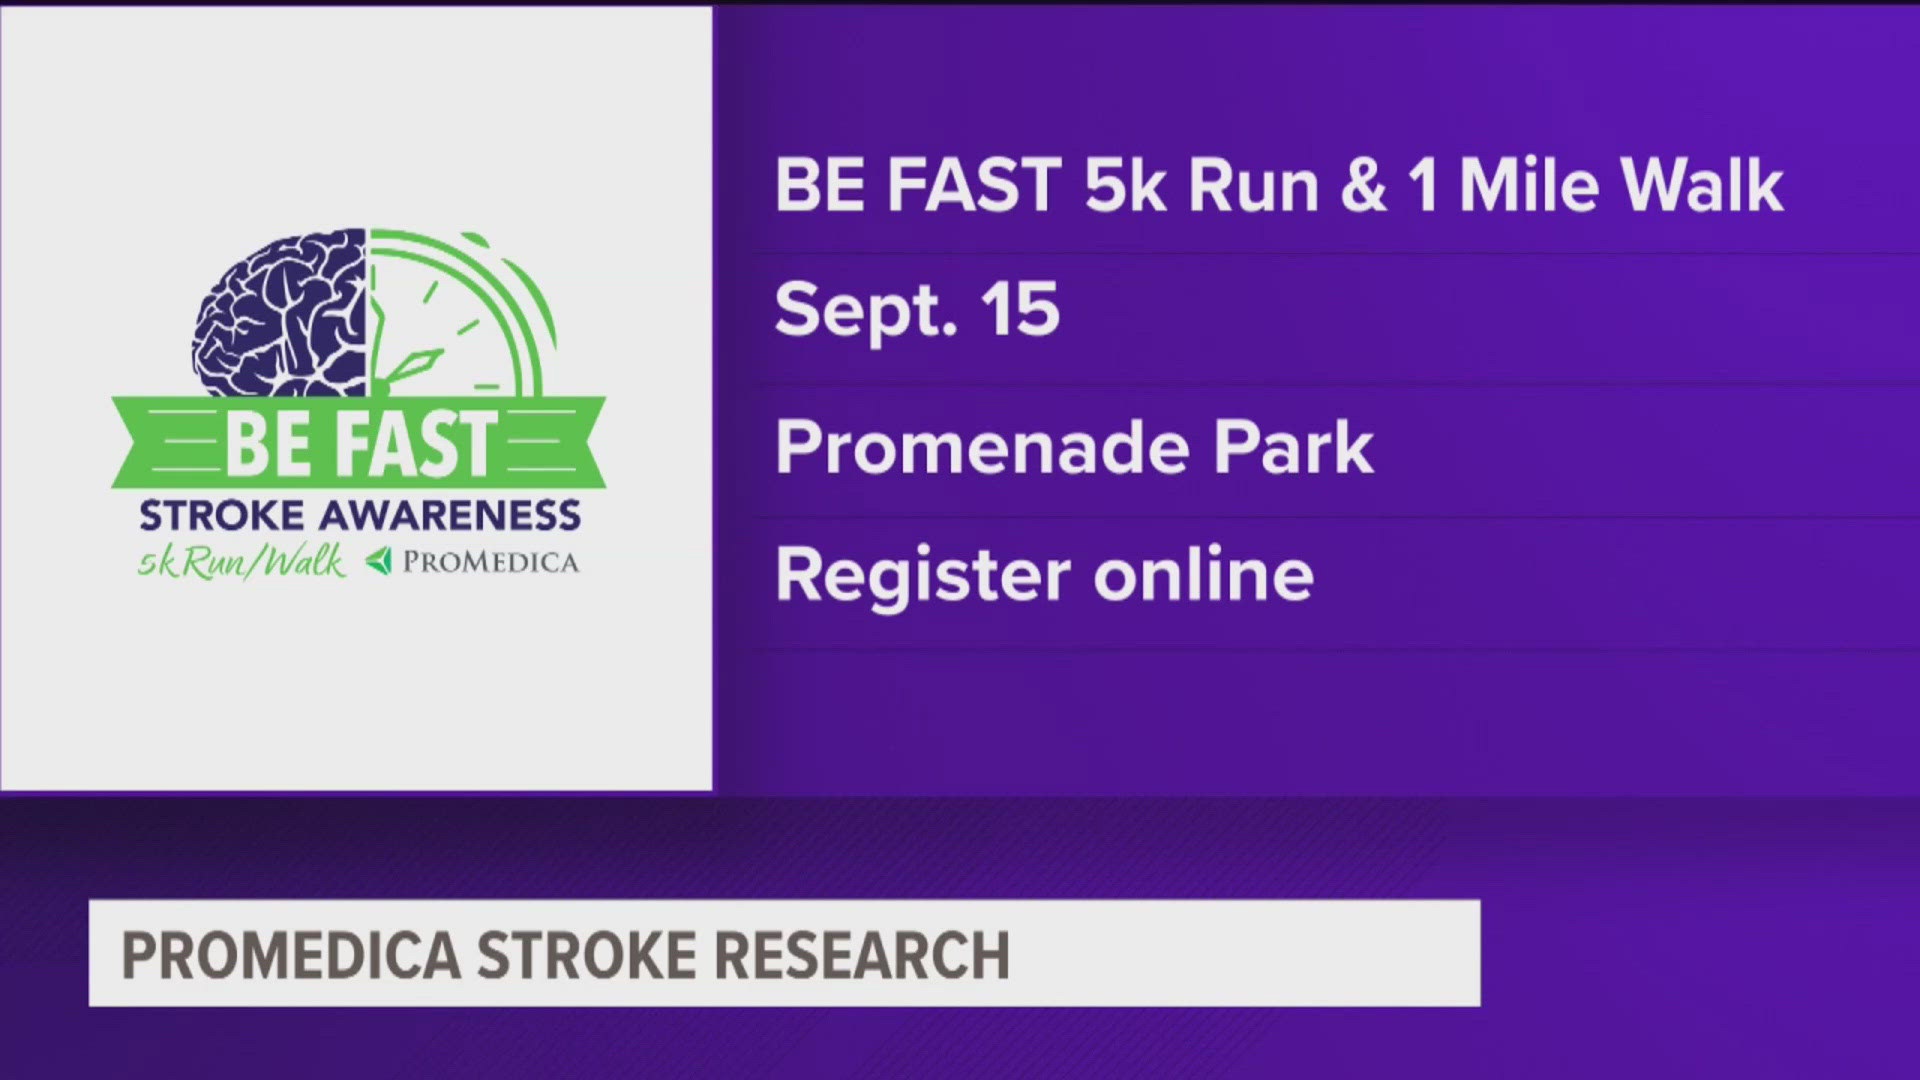 The 5K takes place on Sept. 15 all in an effort to raise stroke awareness.